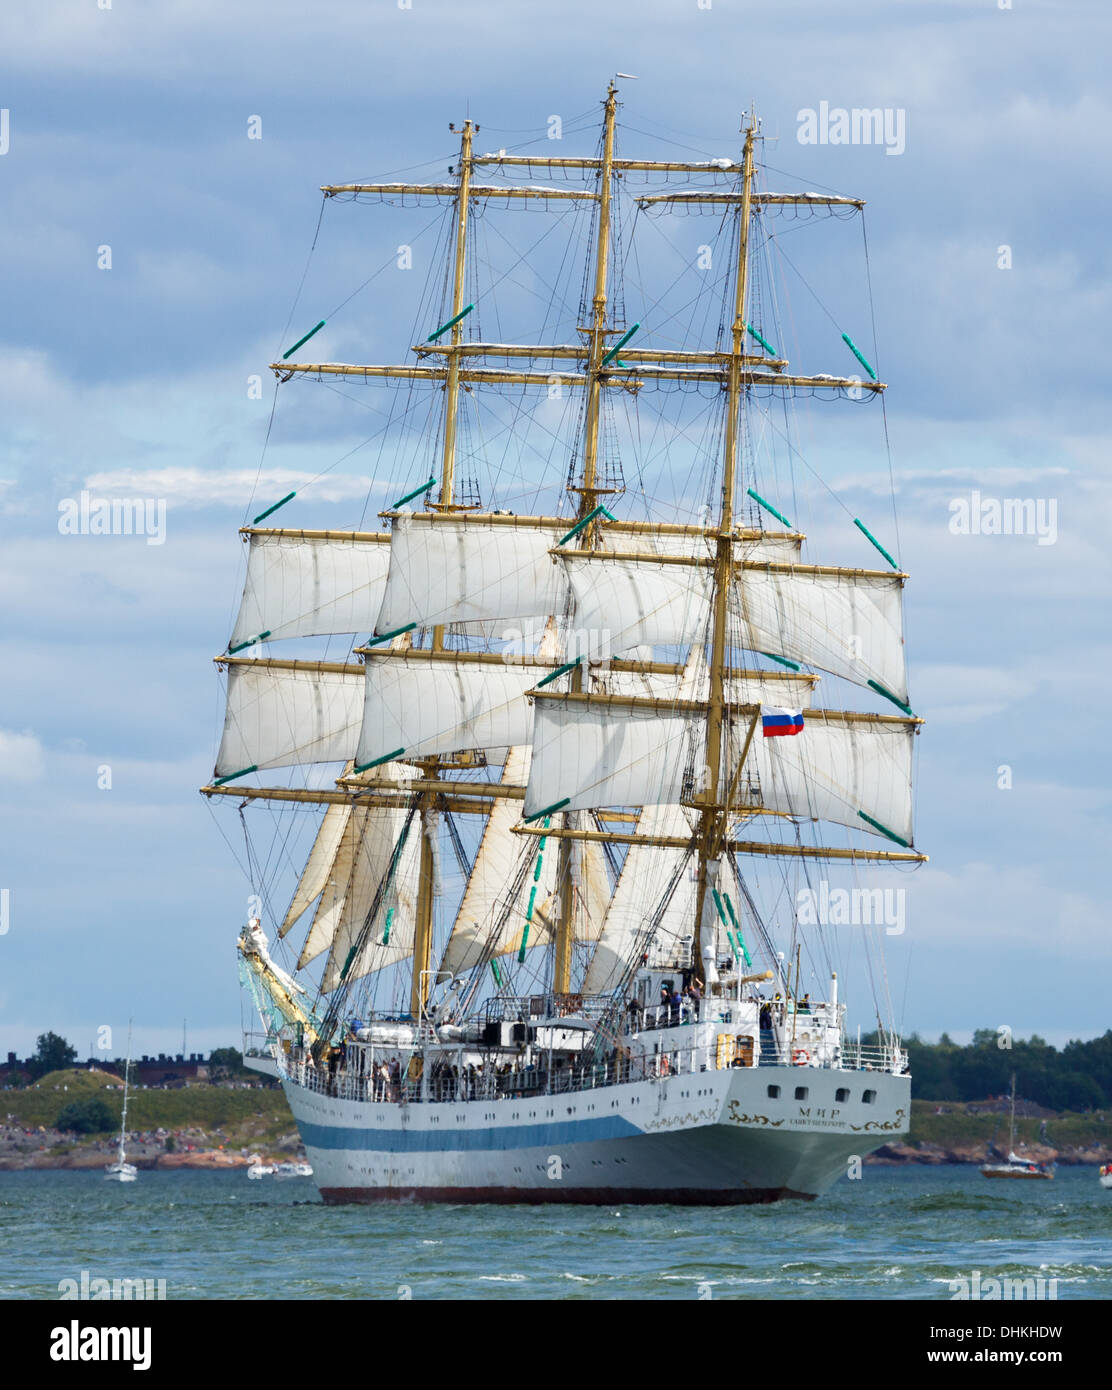 STS Mir is a three-masted, full rigged training ship, based in St. Petersburg, Russia. Here she departs from Helsinki. Stock Photo